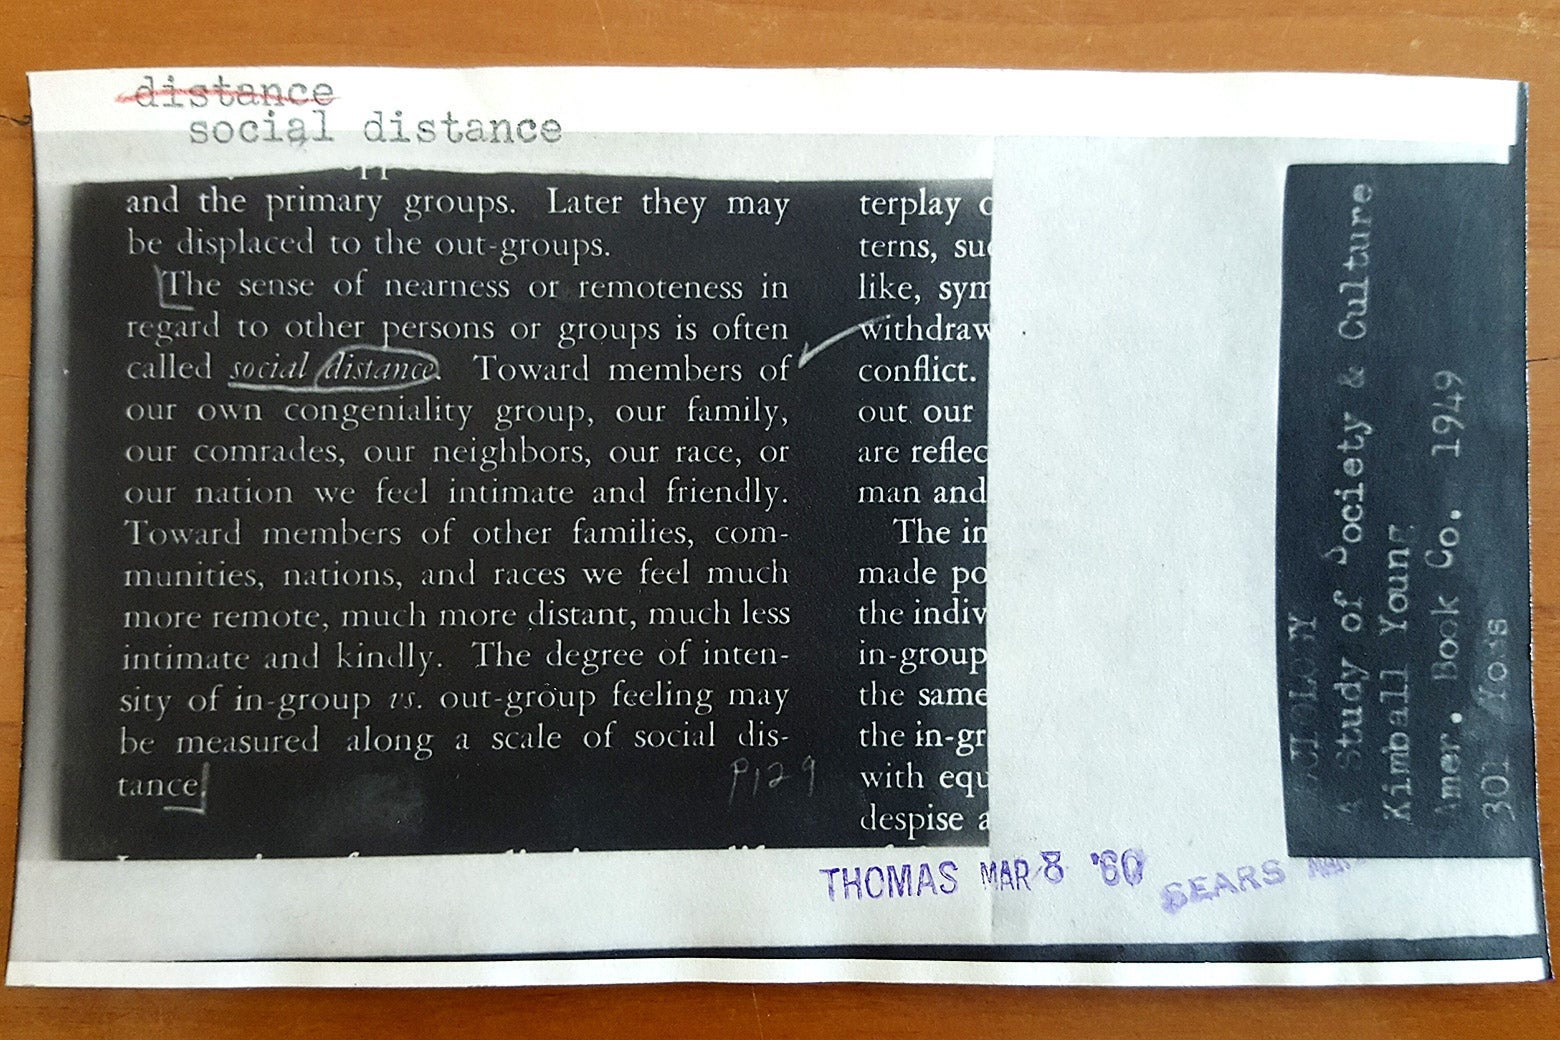 A clipping showing a definition for "social distance."